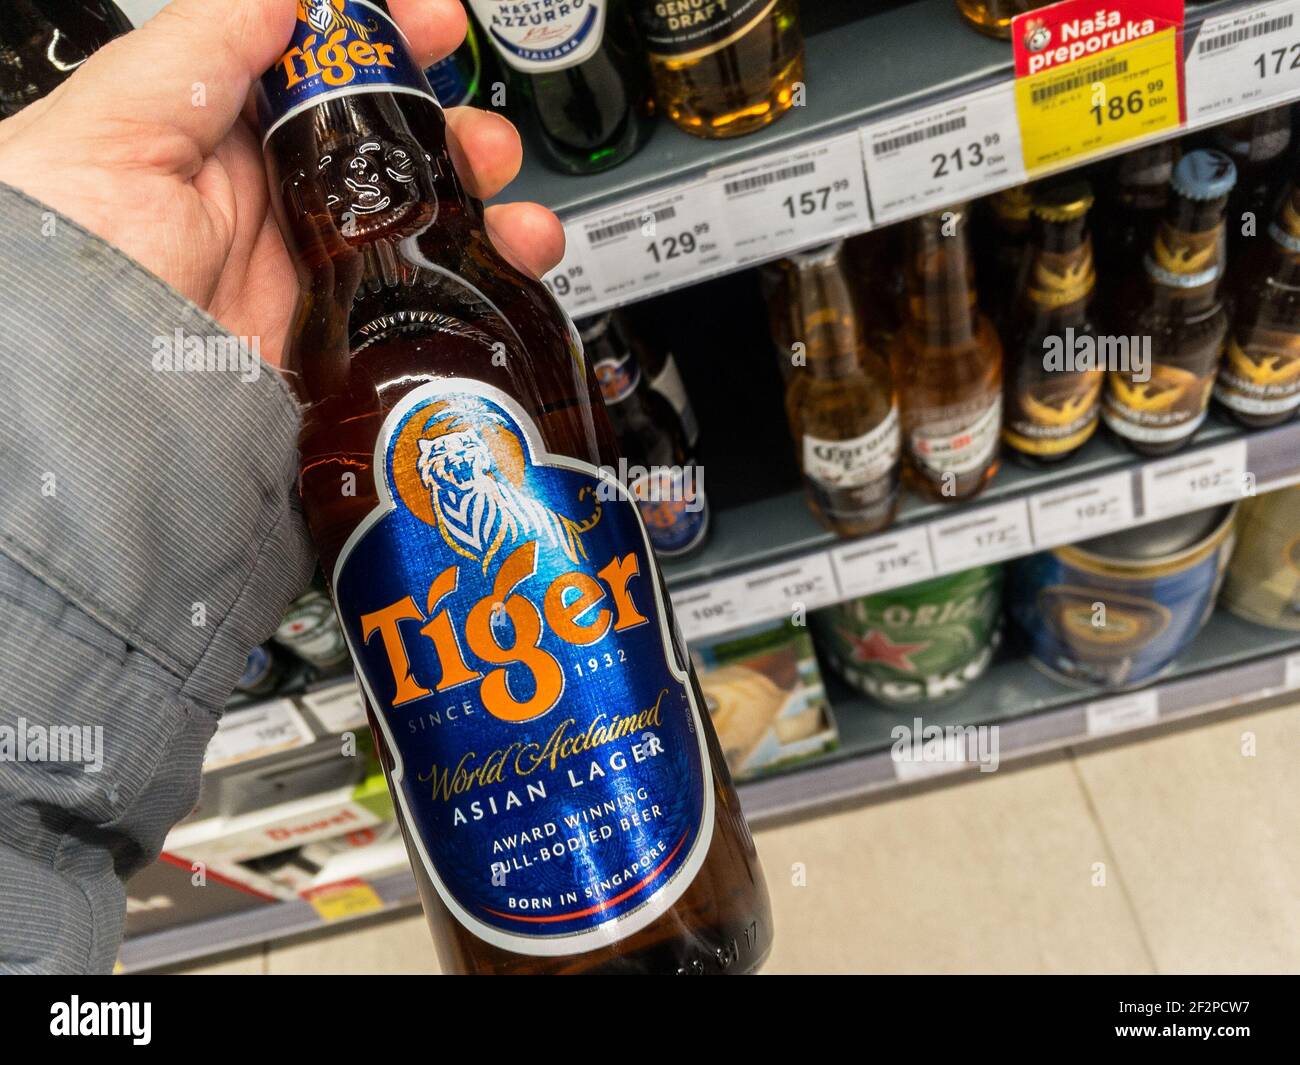 BELGRADE, SERBIA - MARCH 3, 2021: Hands holding a bottle of Tiger beer. Tiger Beer is a brand of Asian lager beer produced by a singapore brewery comp Stock Photo